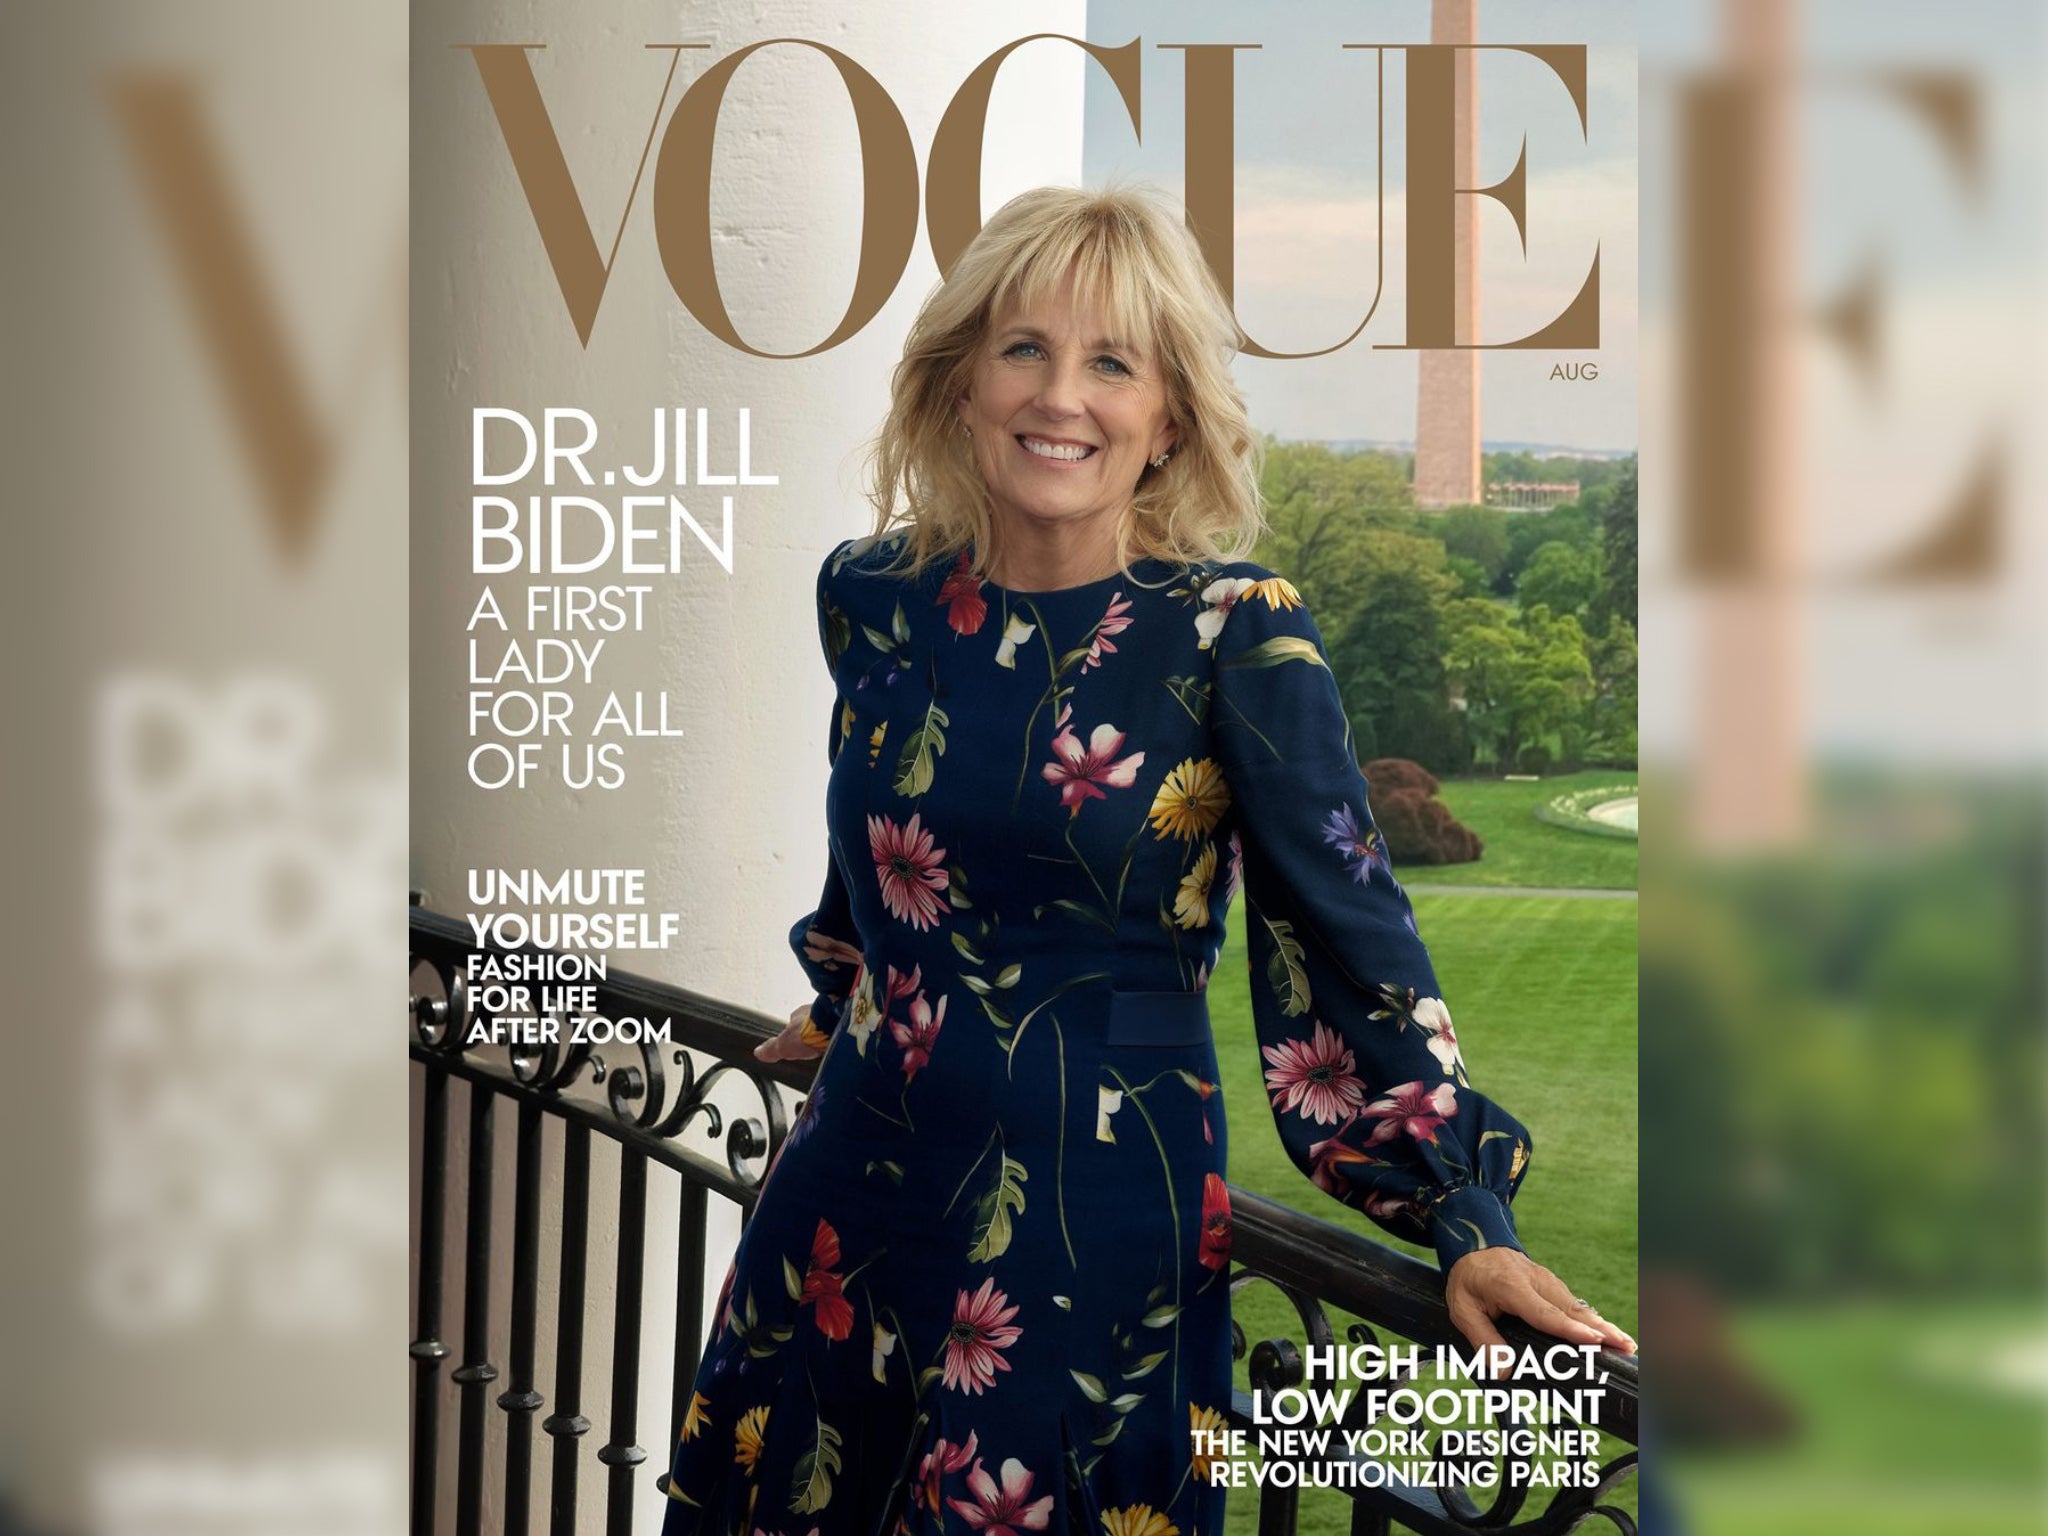 Jill Biden on the cover of the upcoming August issue of Vogue magazine